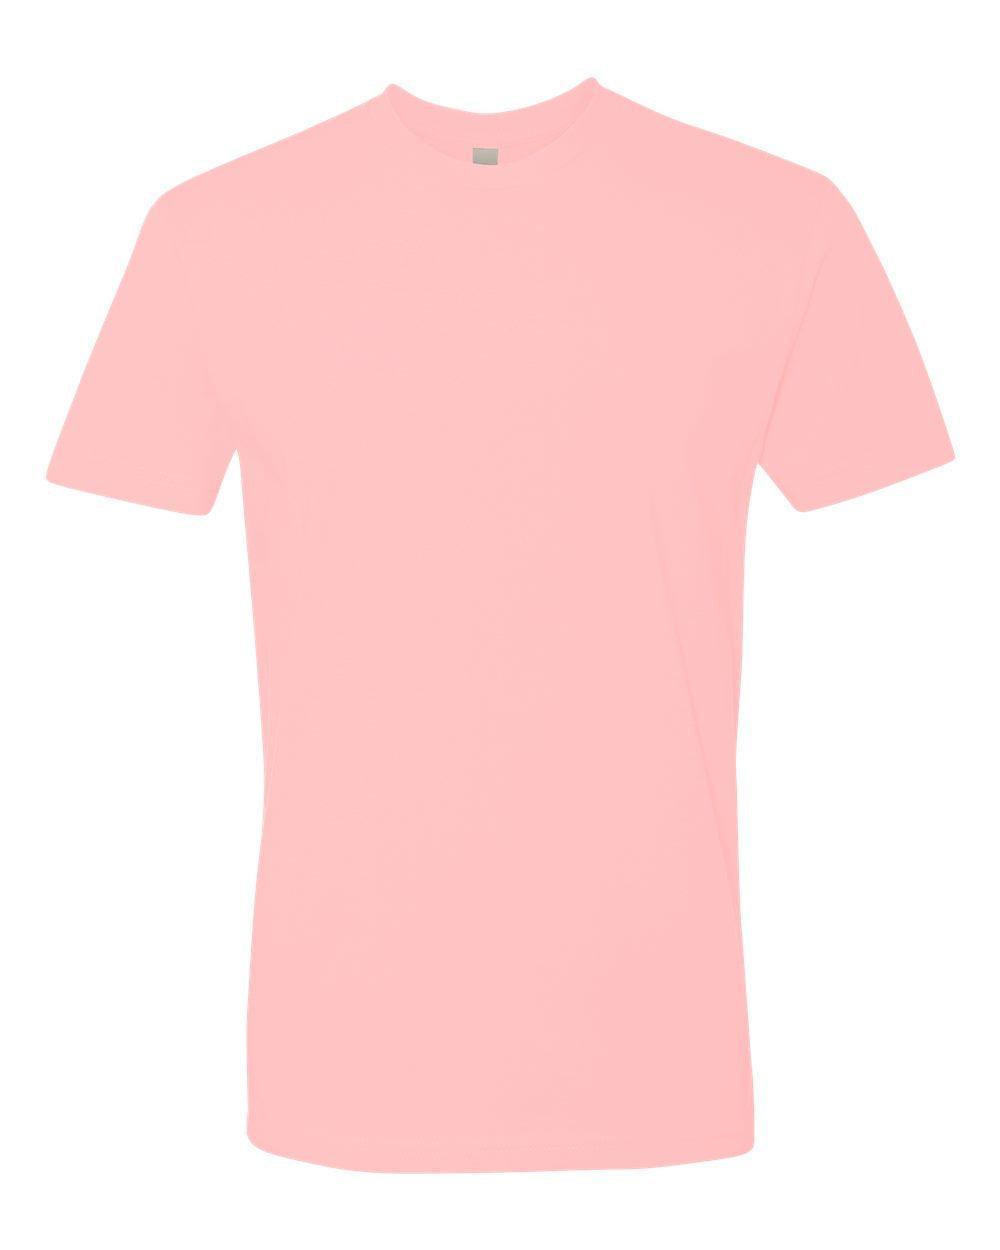 Blank Next Level T-Shirt - Constantly Create Shop